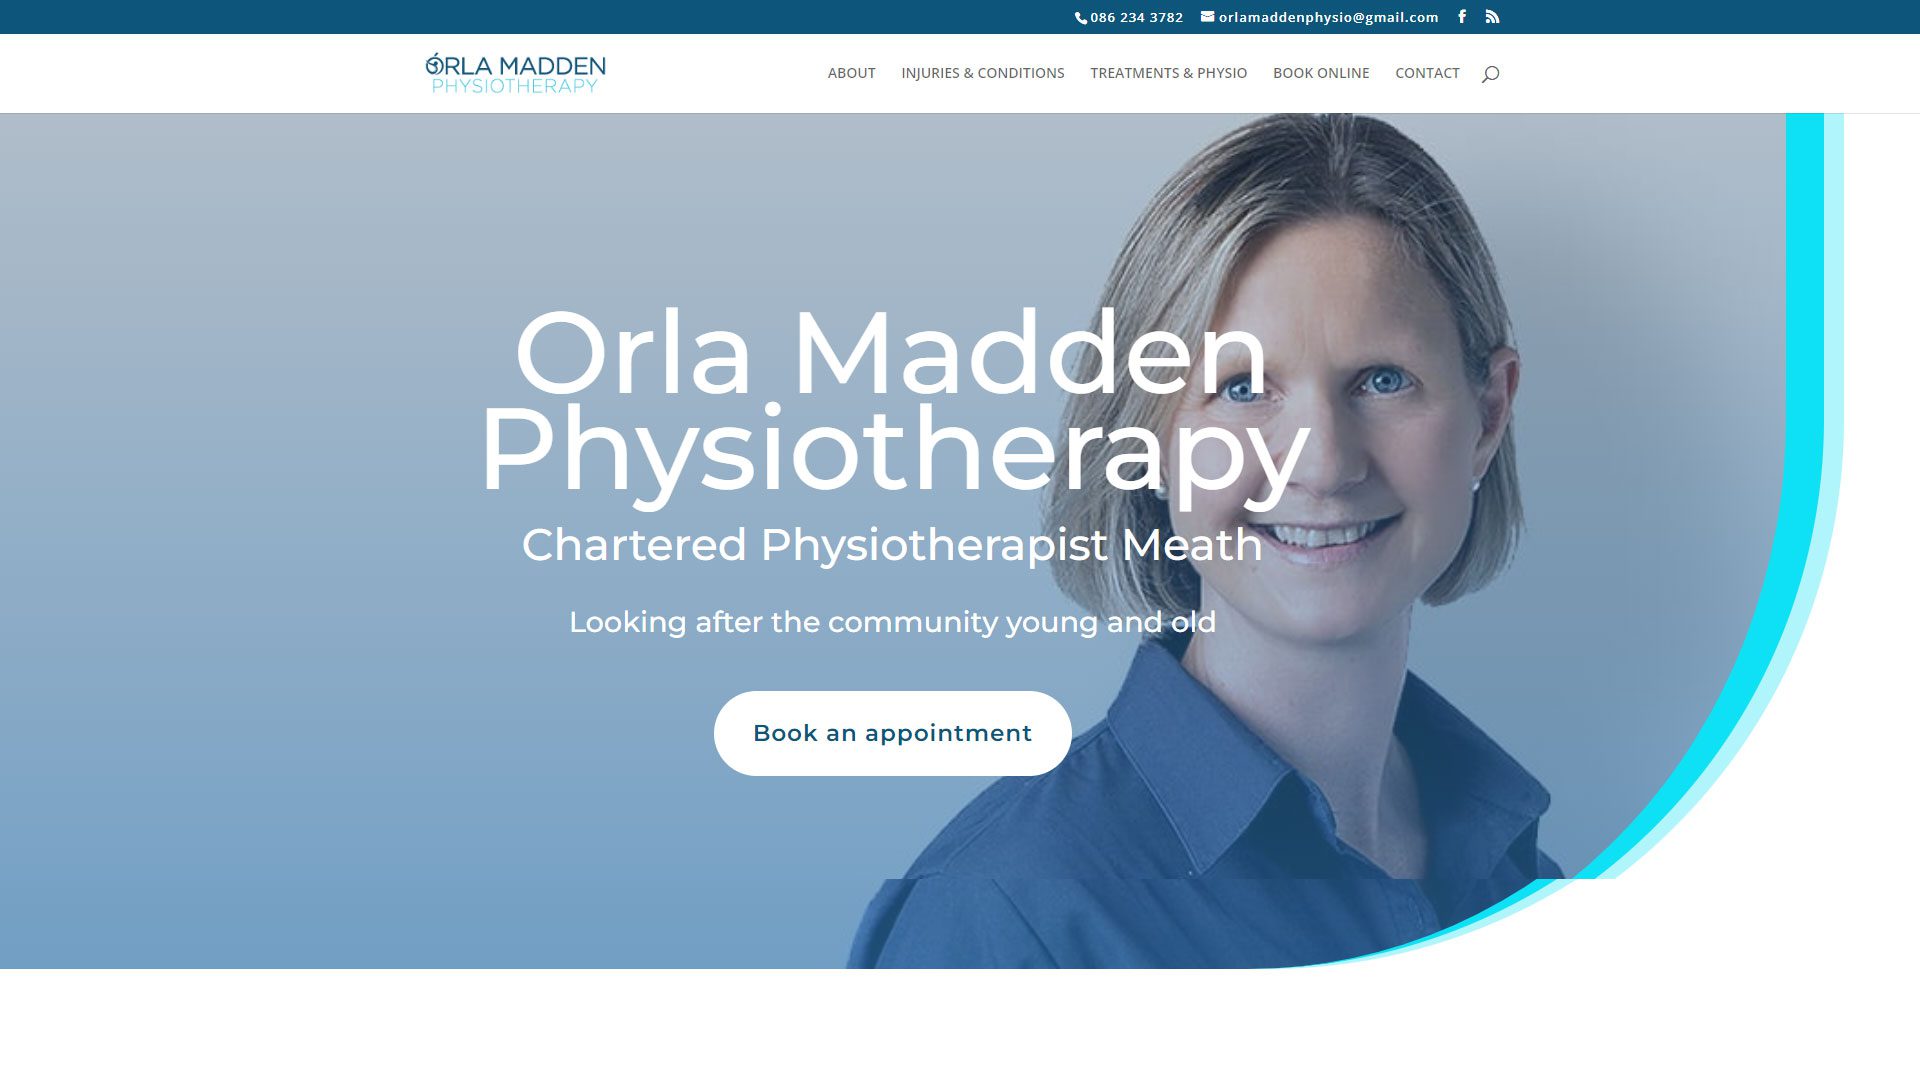 Orla Madden Physio Above the Fold Section